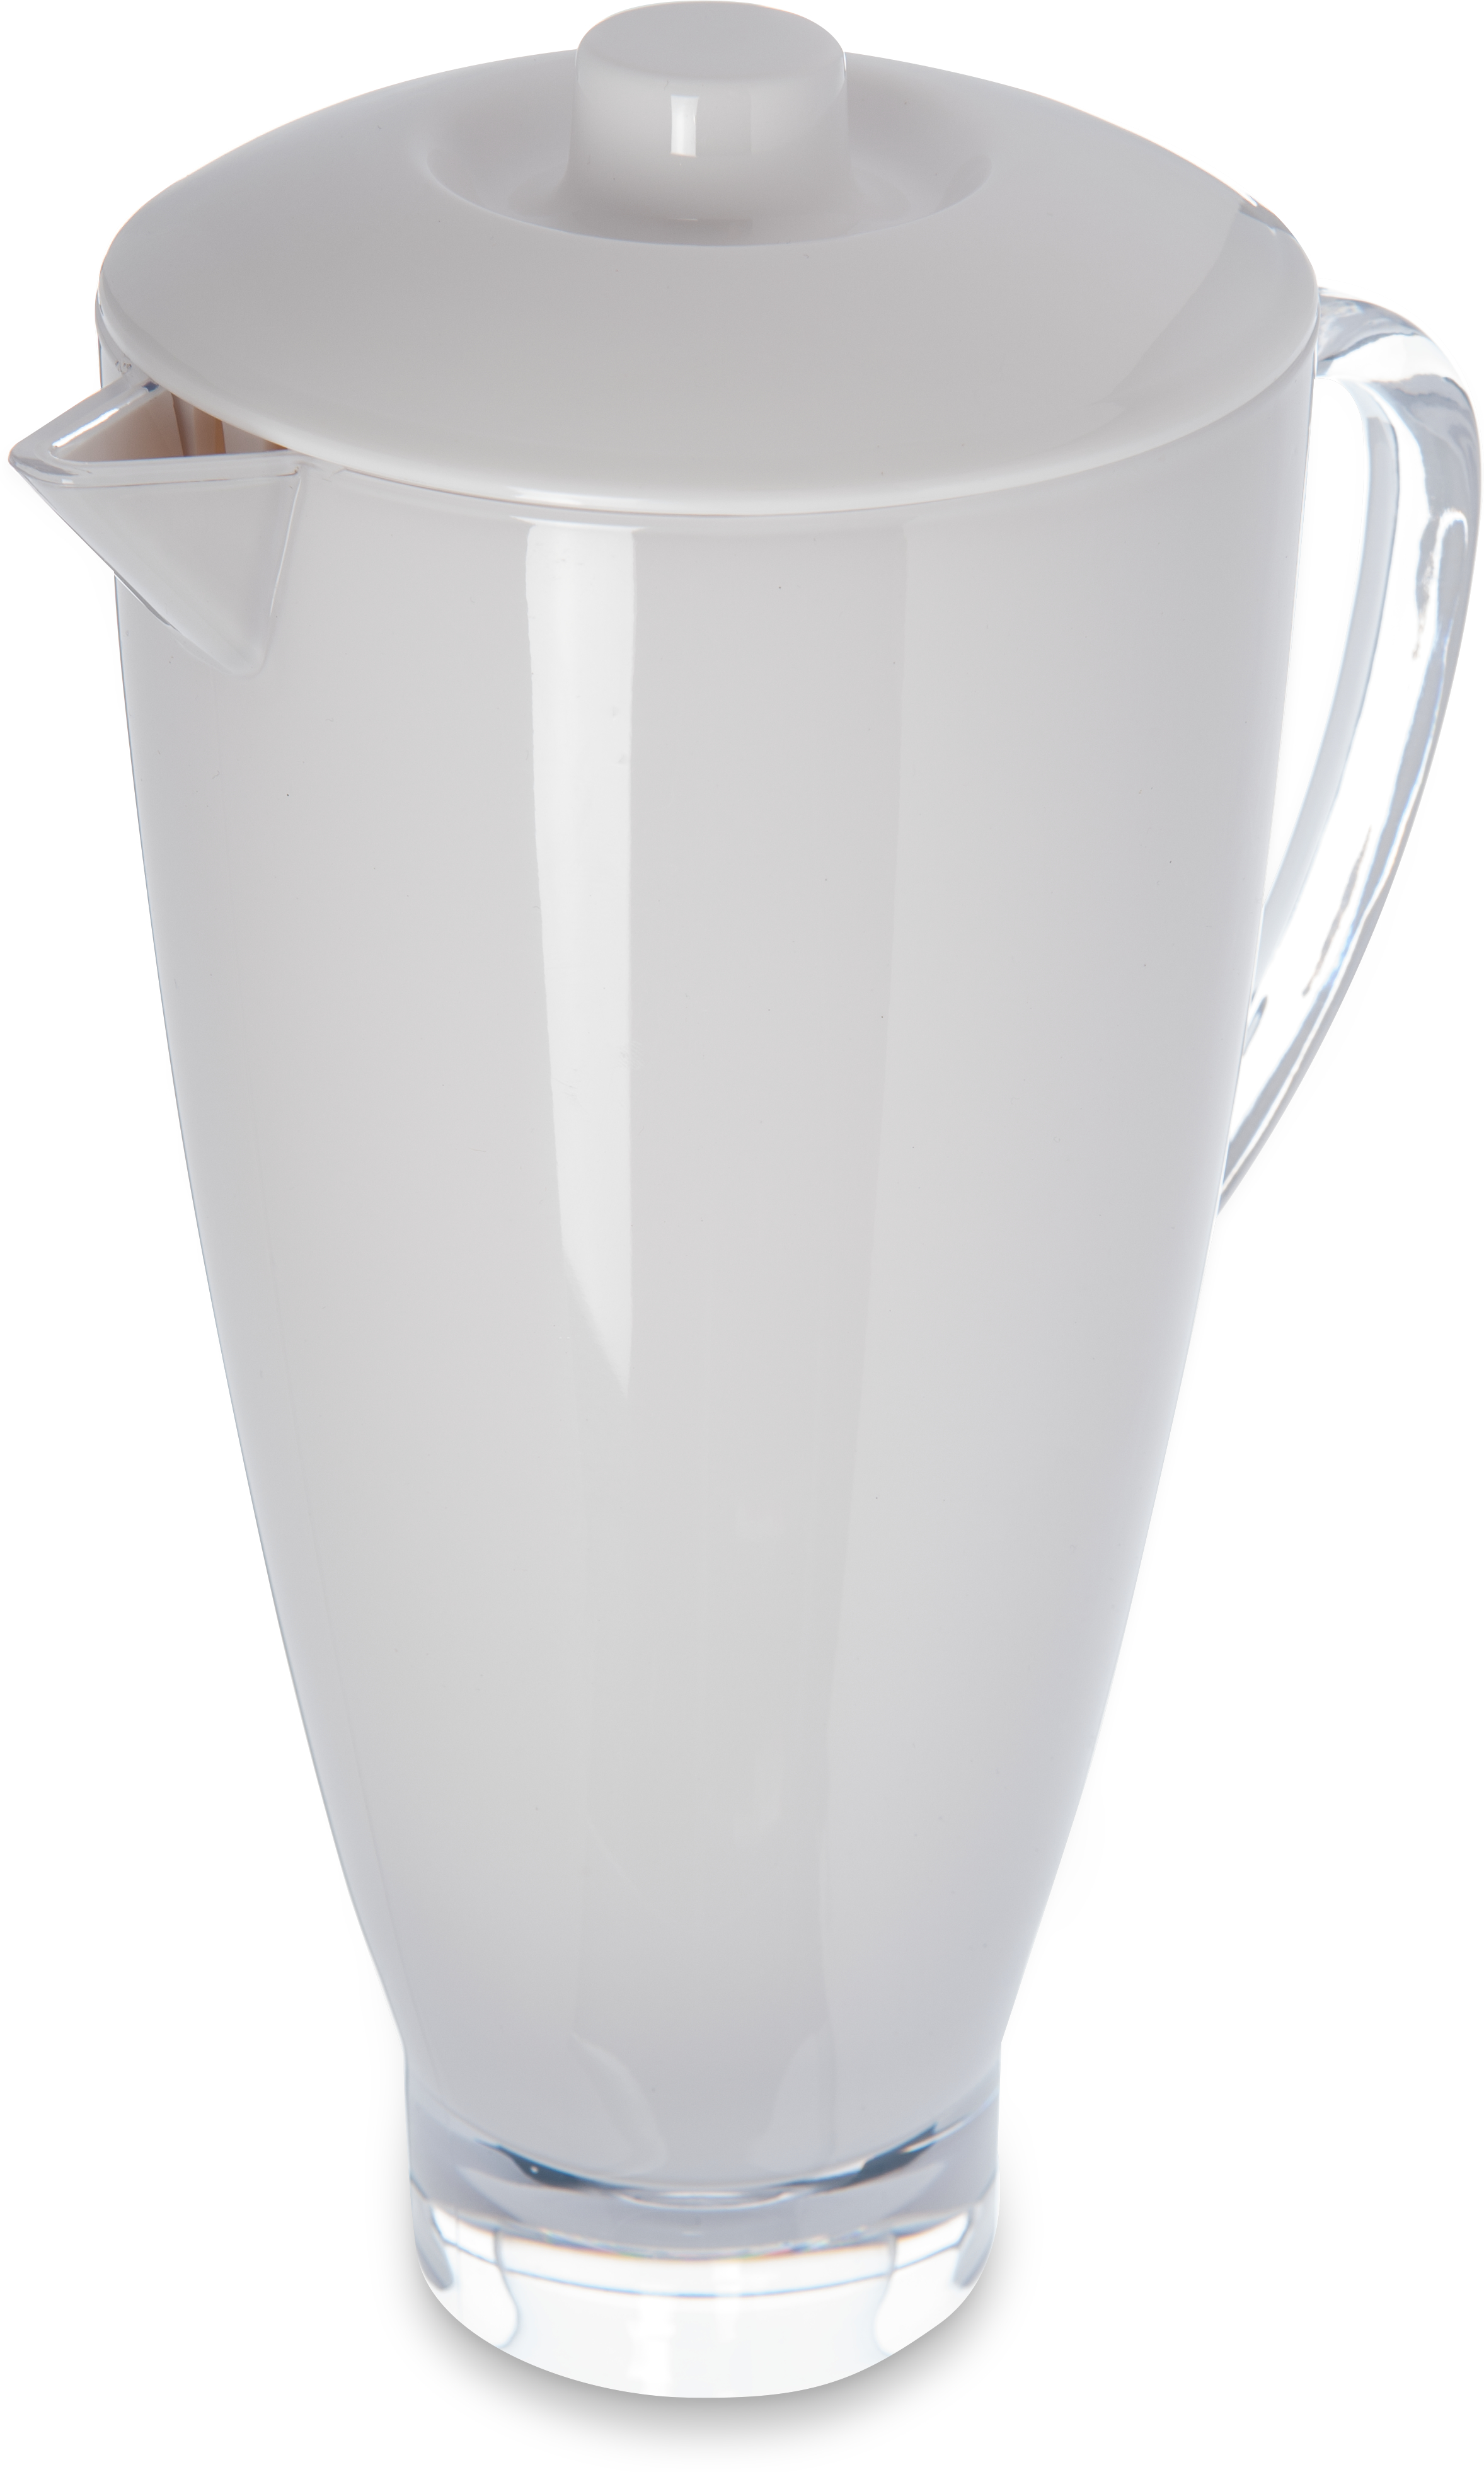 Epicure Cased Pitcher with Lid 74 oz - White